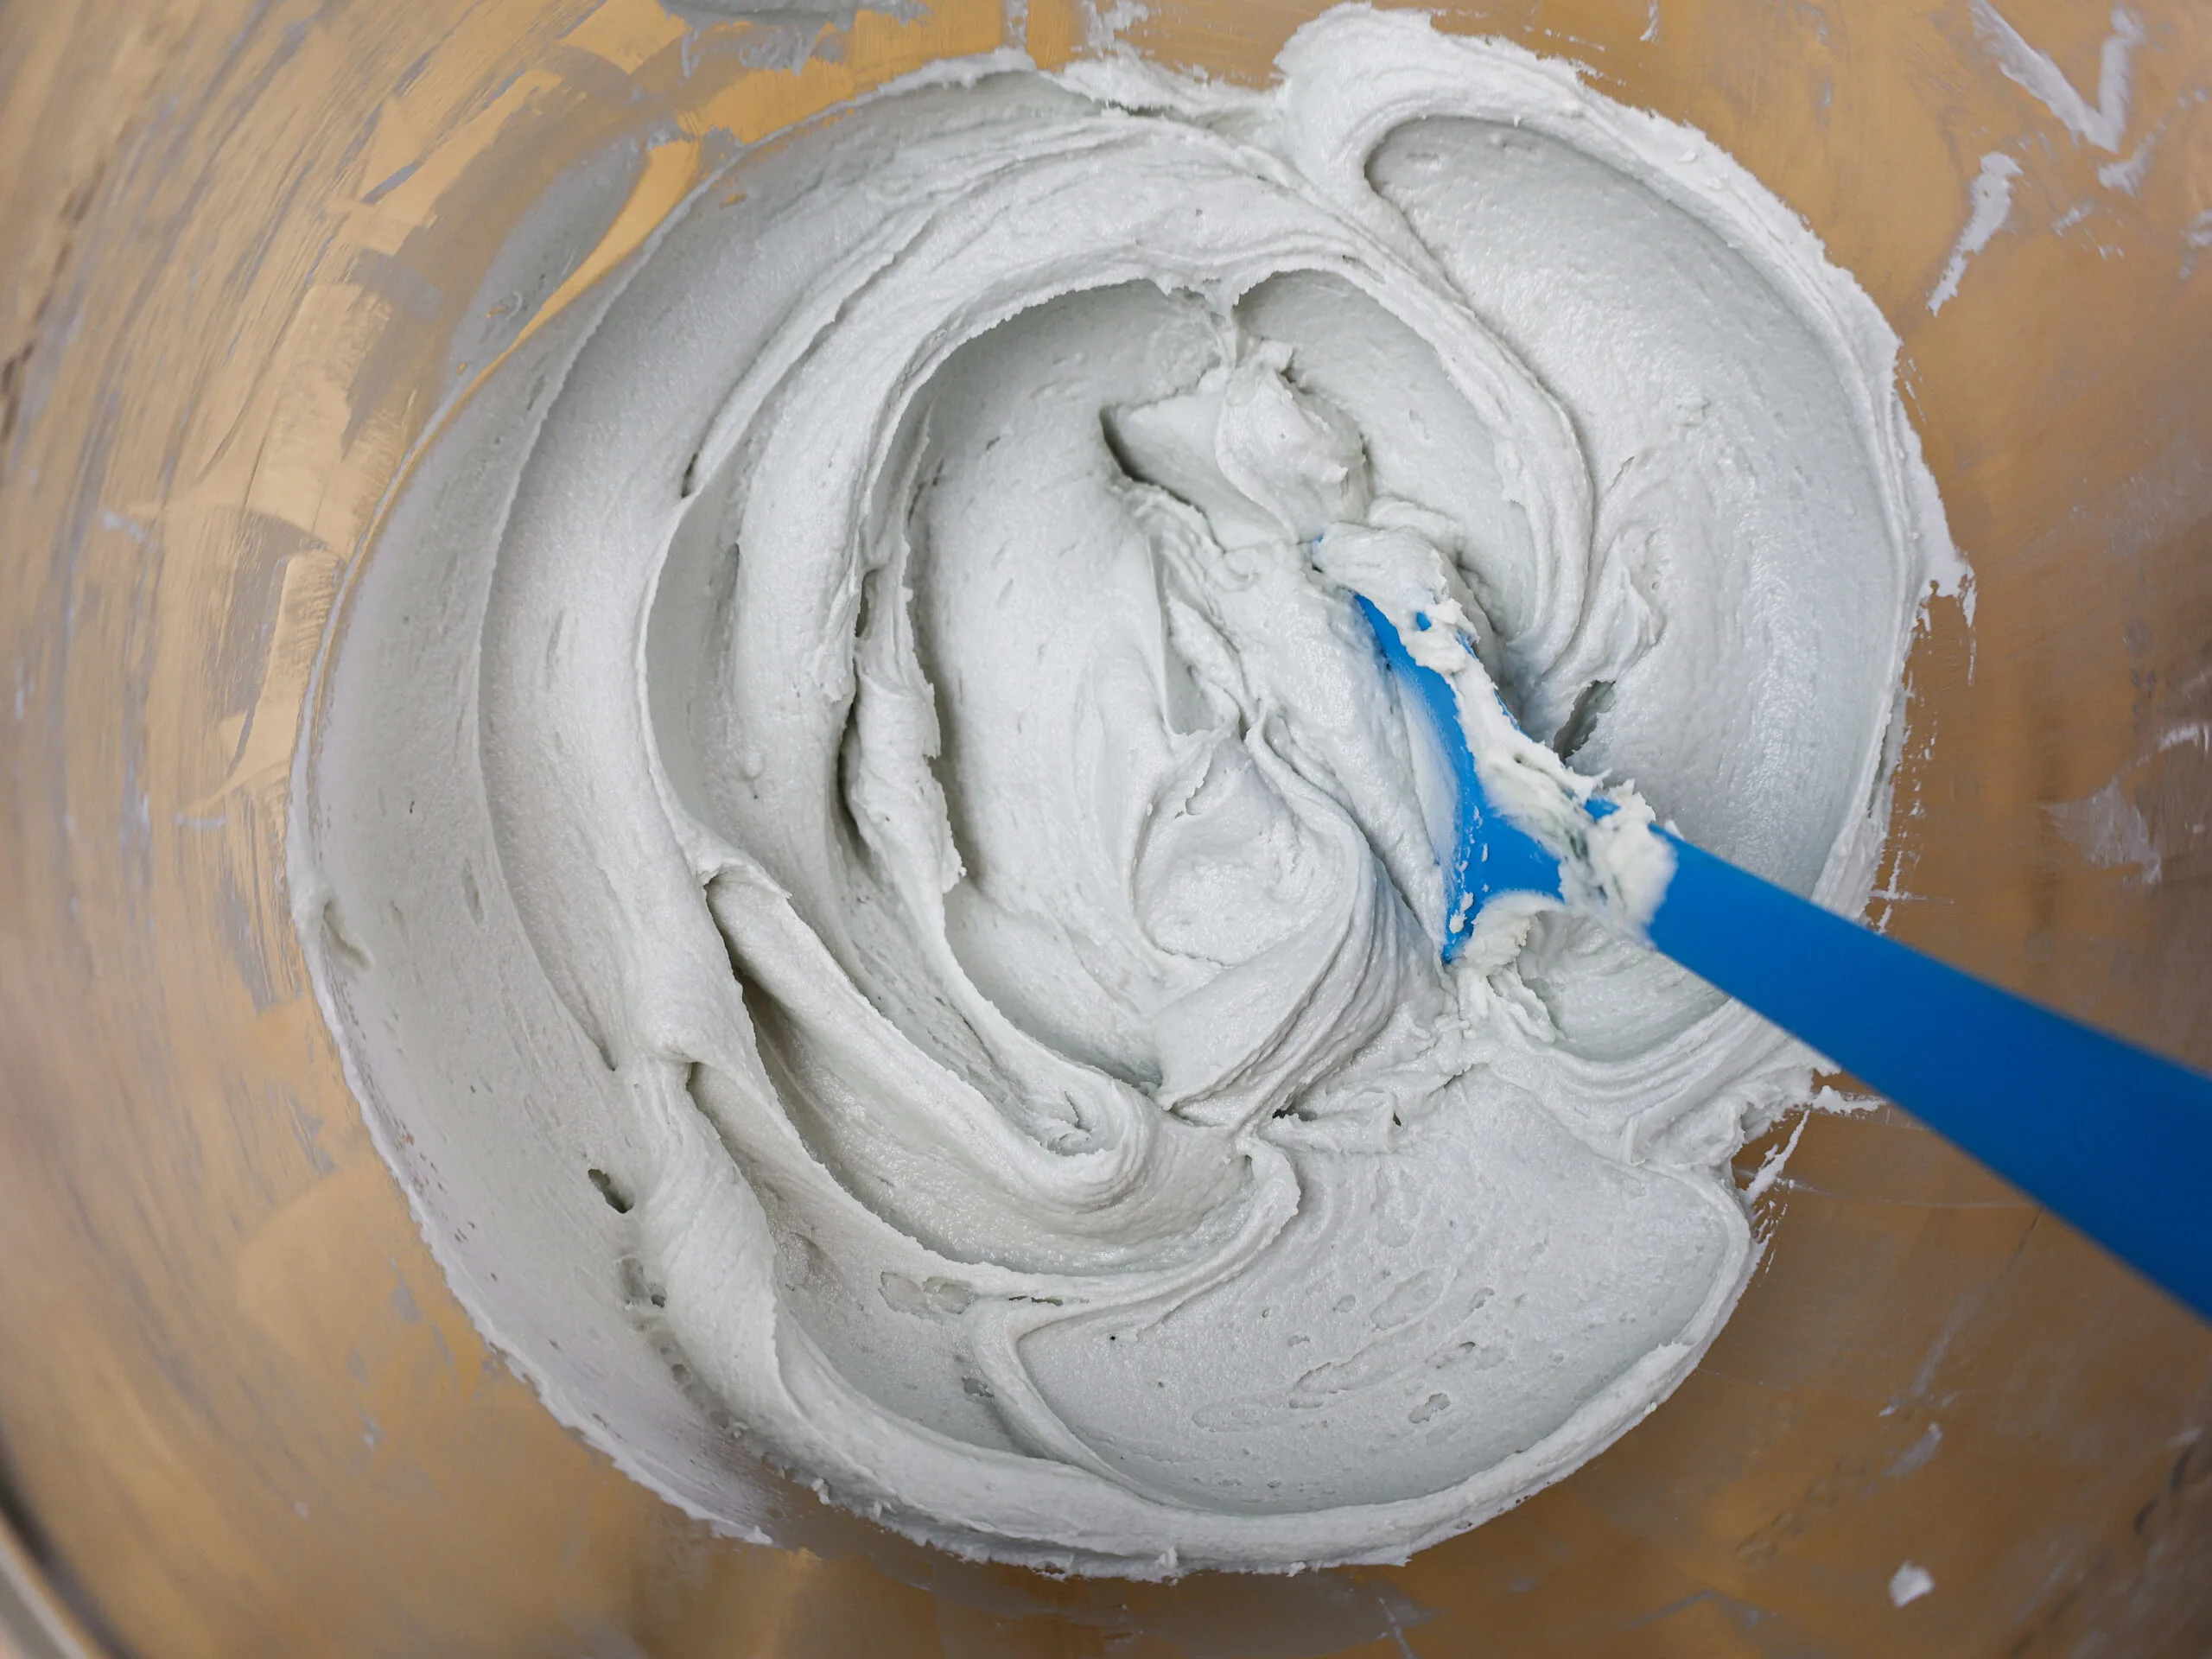 image of grey buttercream frosting in a bowl